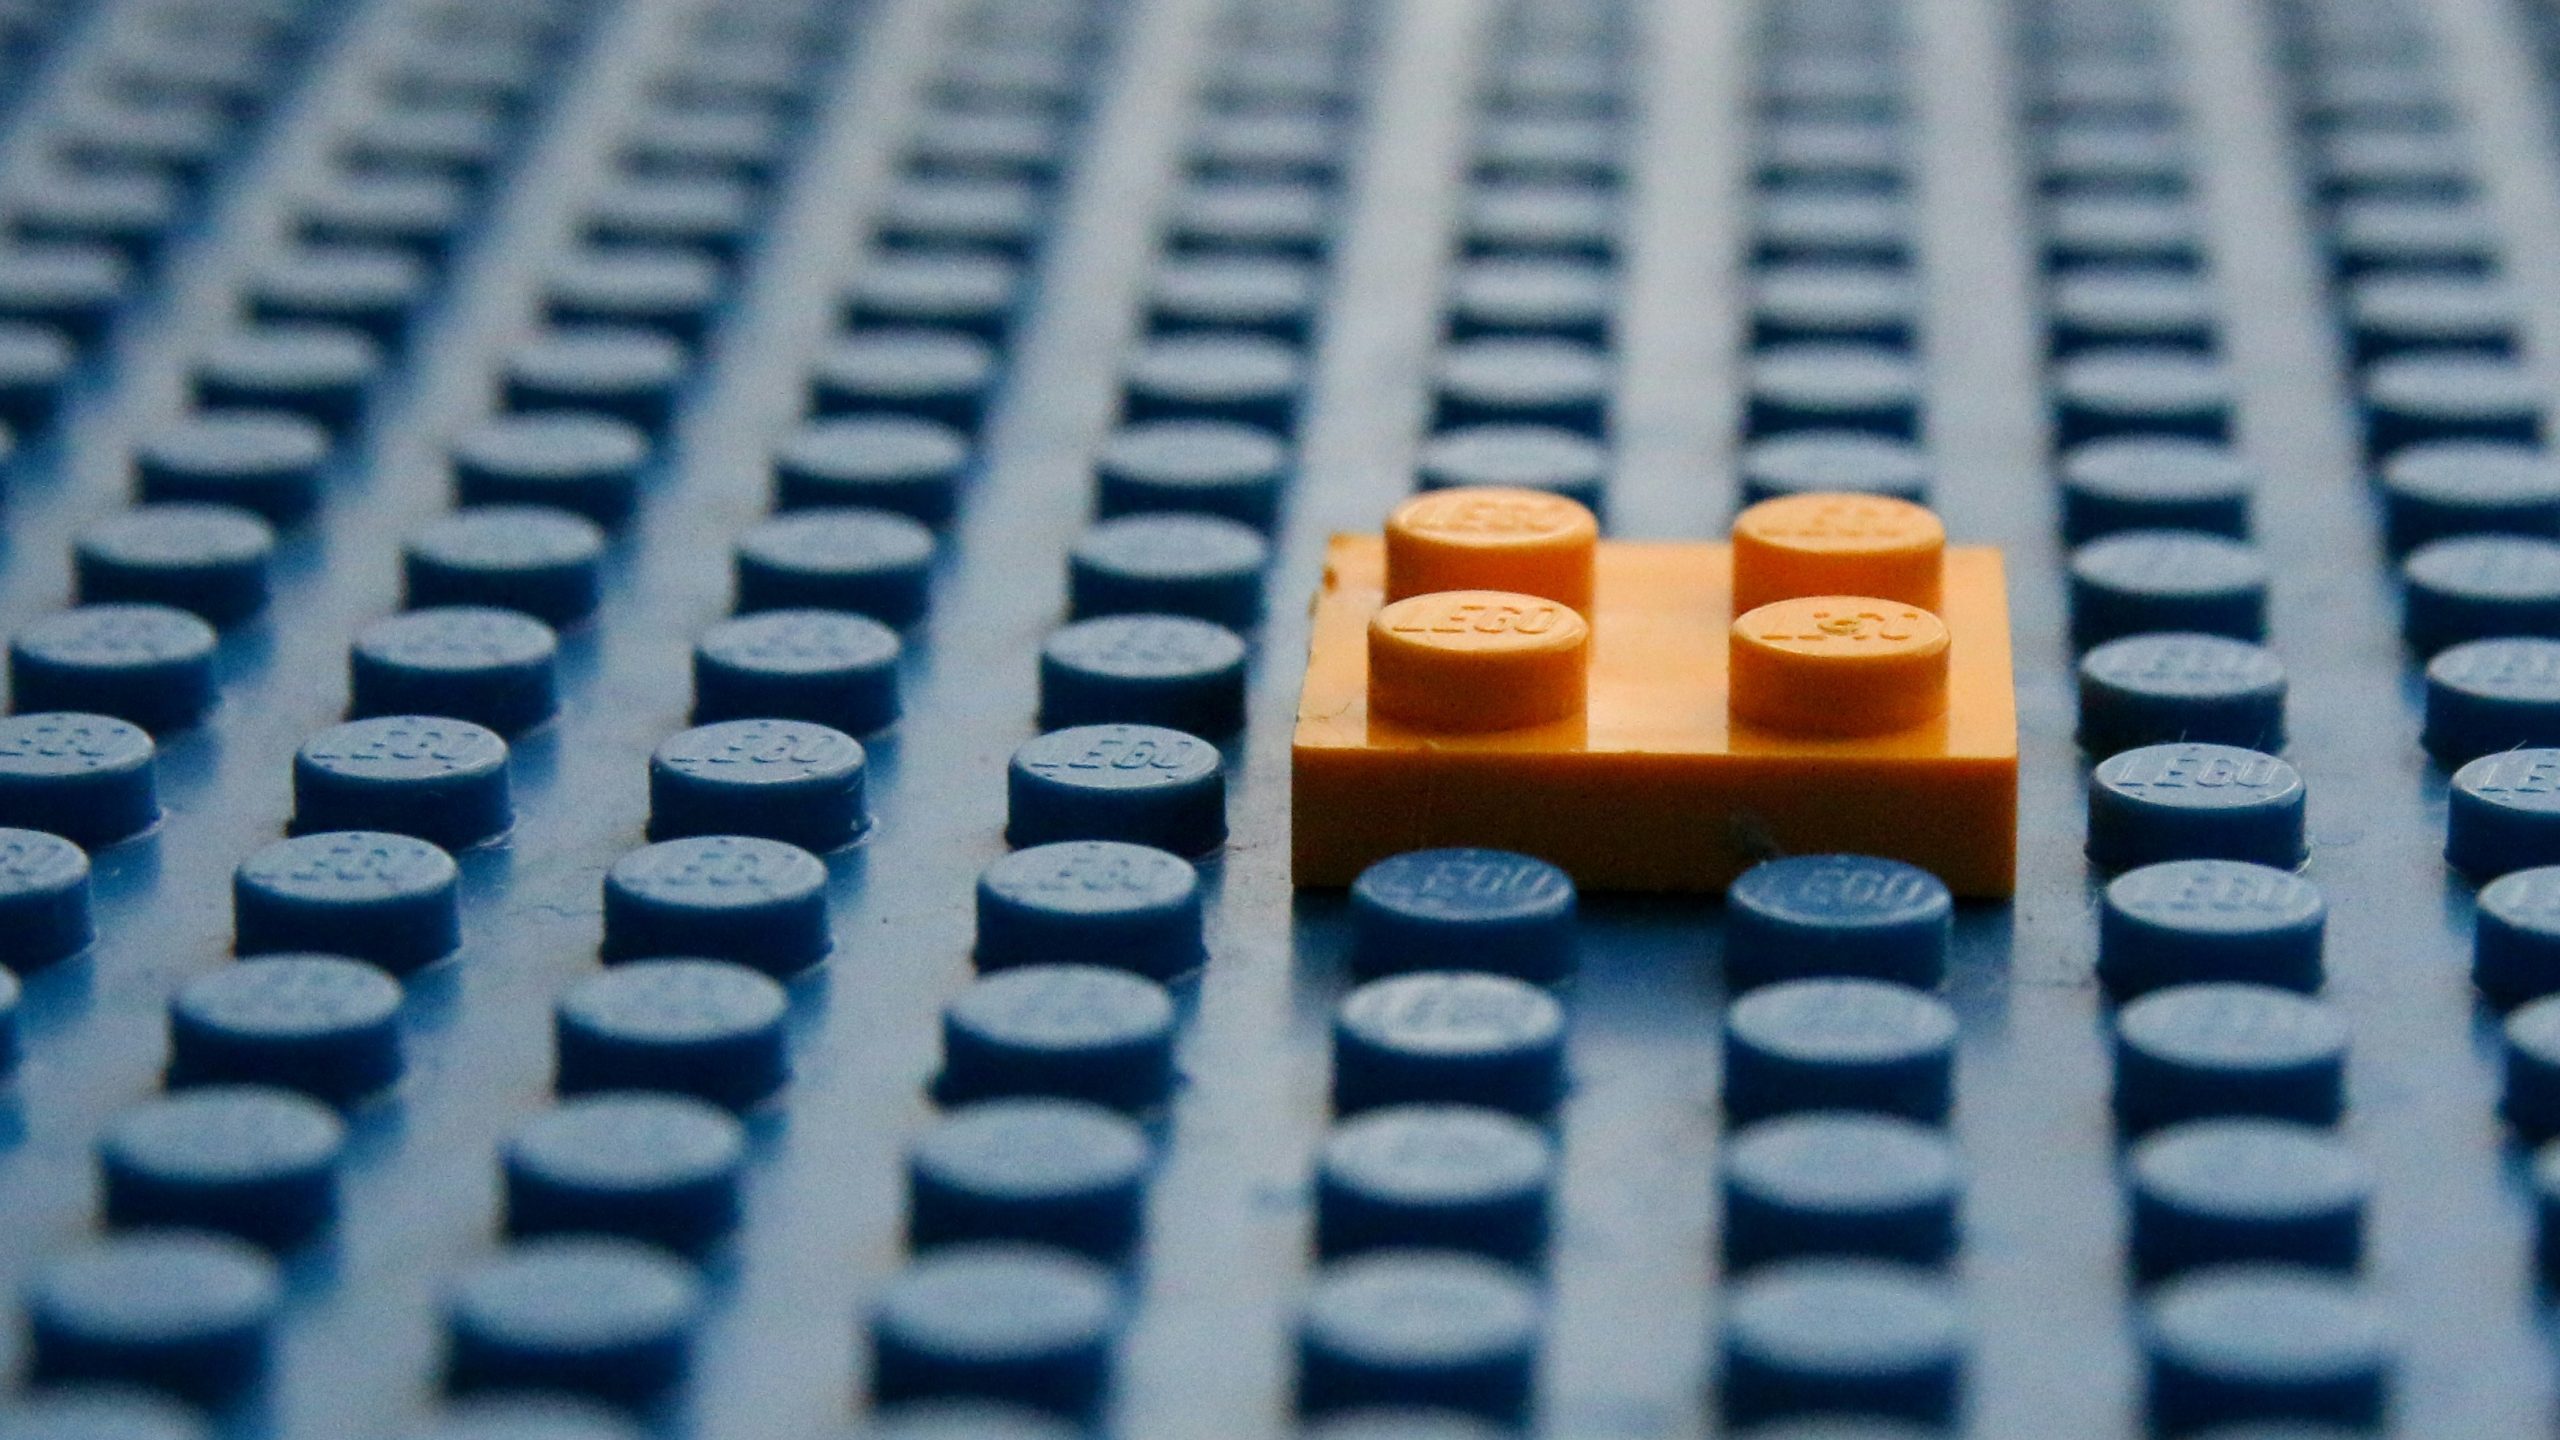 A small orange square lego brick attached to to a large grey lego sheet